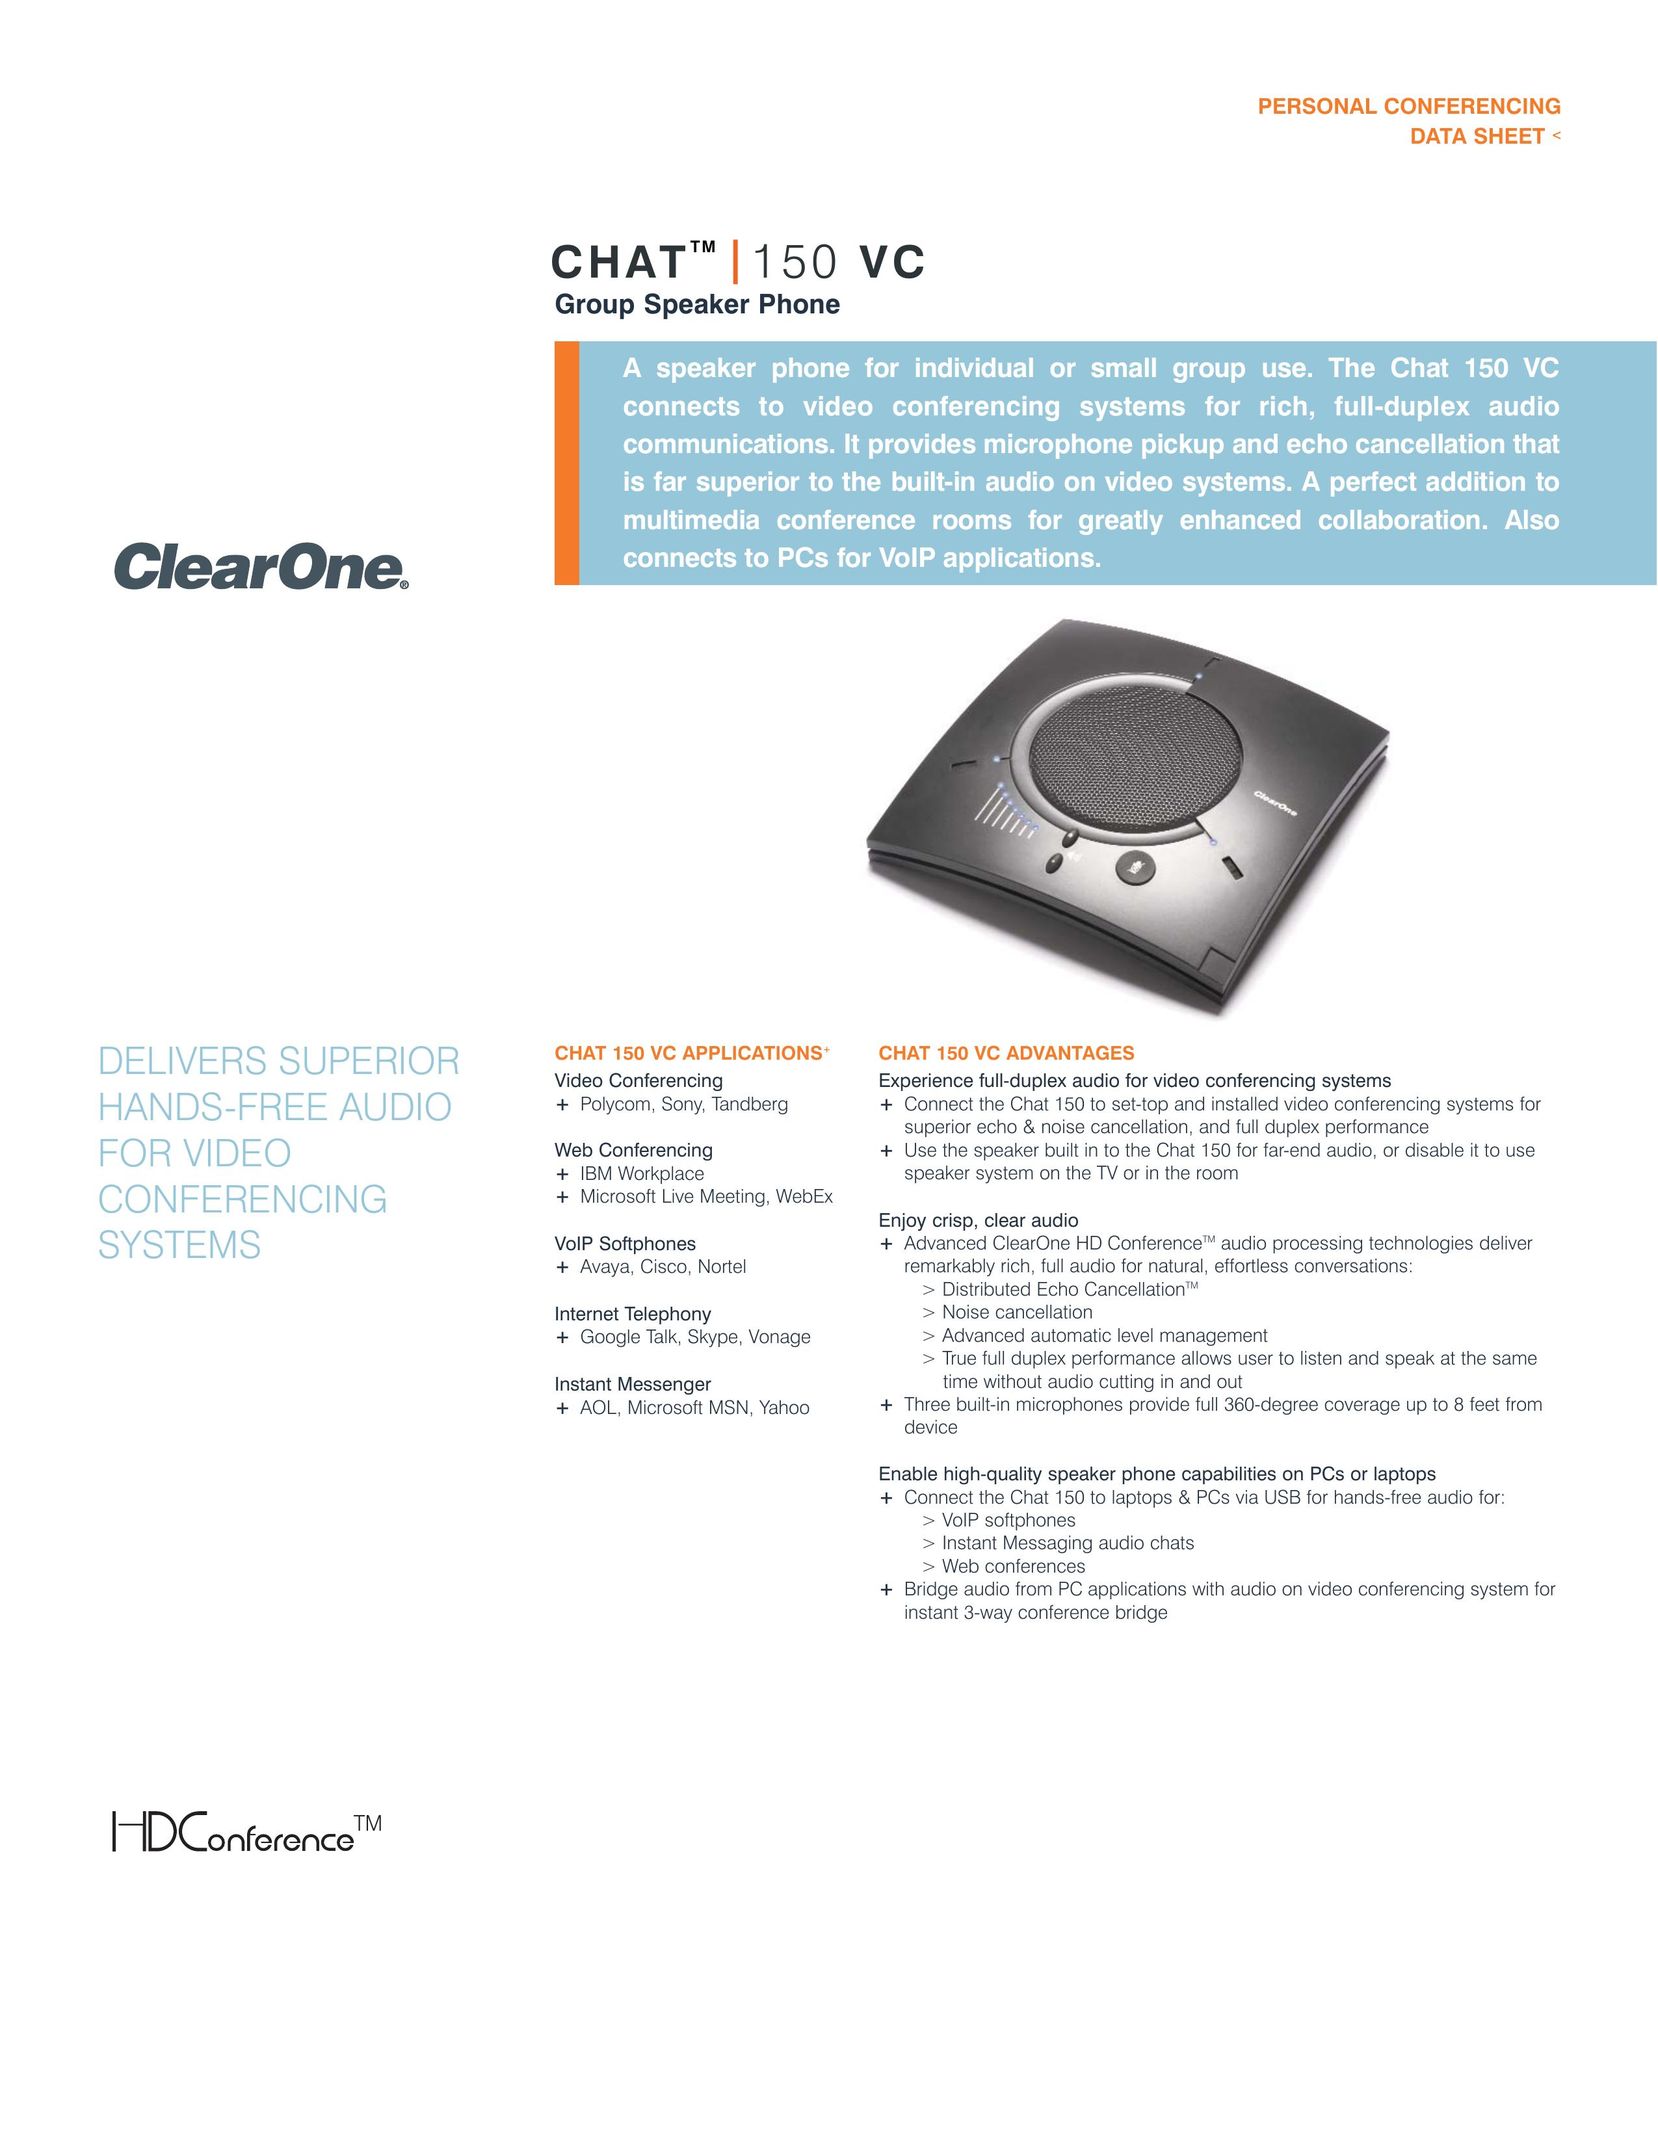 ClearOne comm 150 VC Corded Headset User Manual (Page 1)